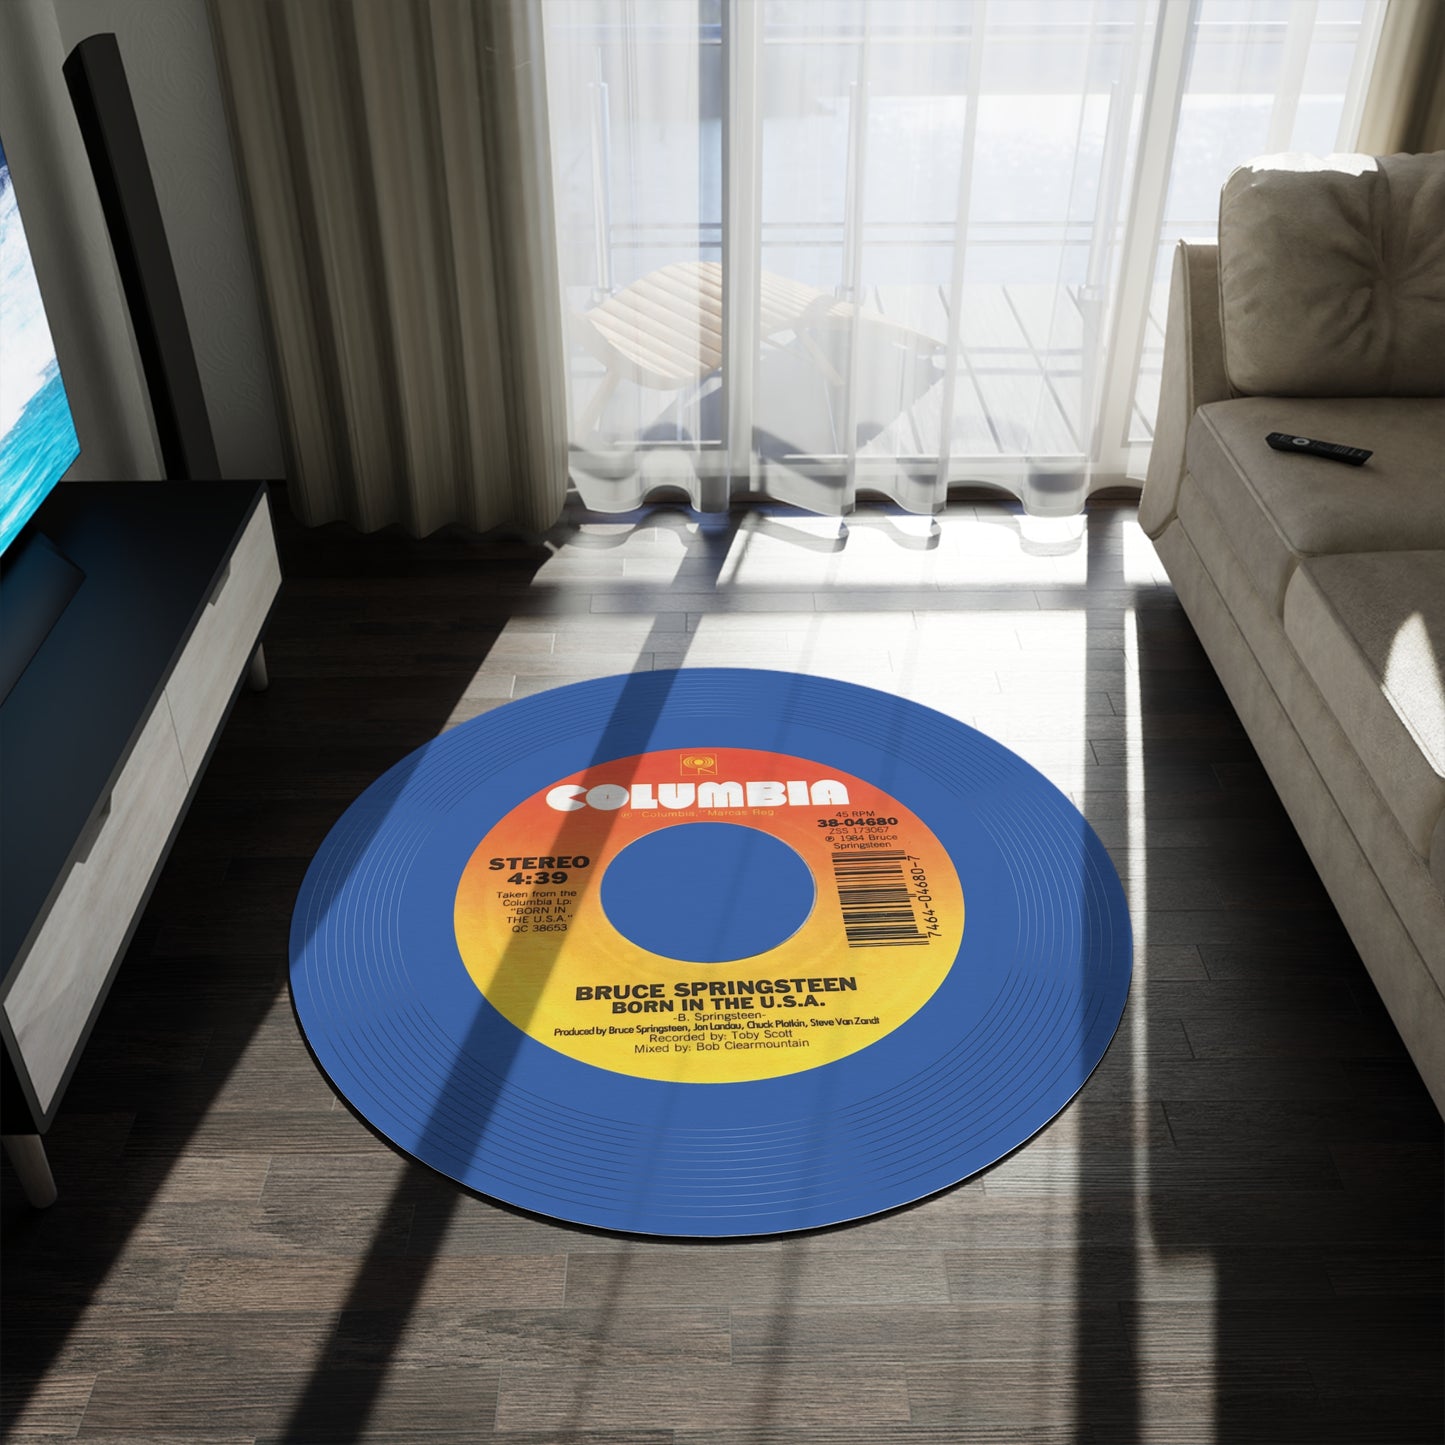 Bruce Springsteen, Born in the USA, Vinyl record Mat (Customize a mat on request)